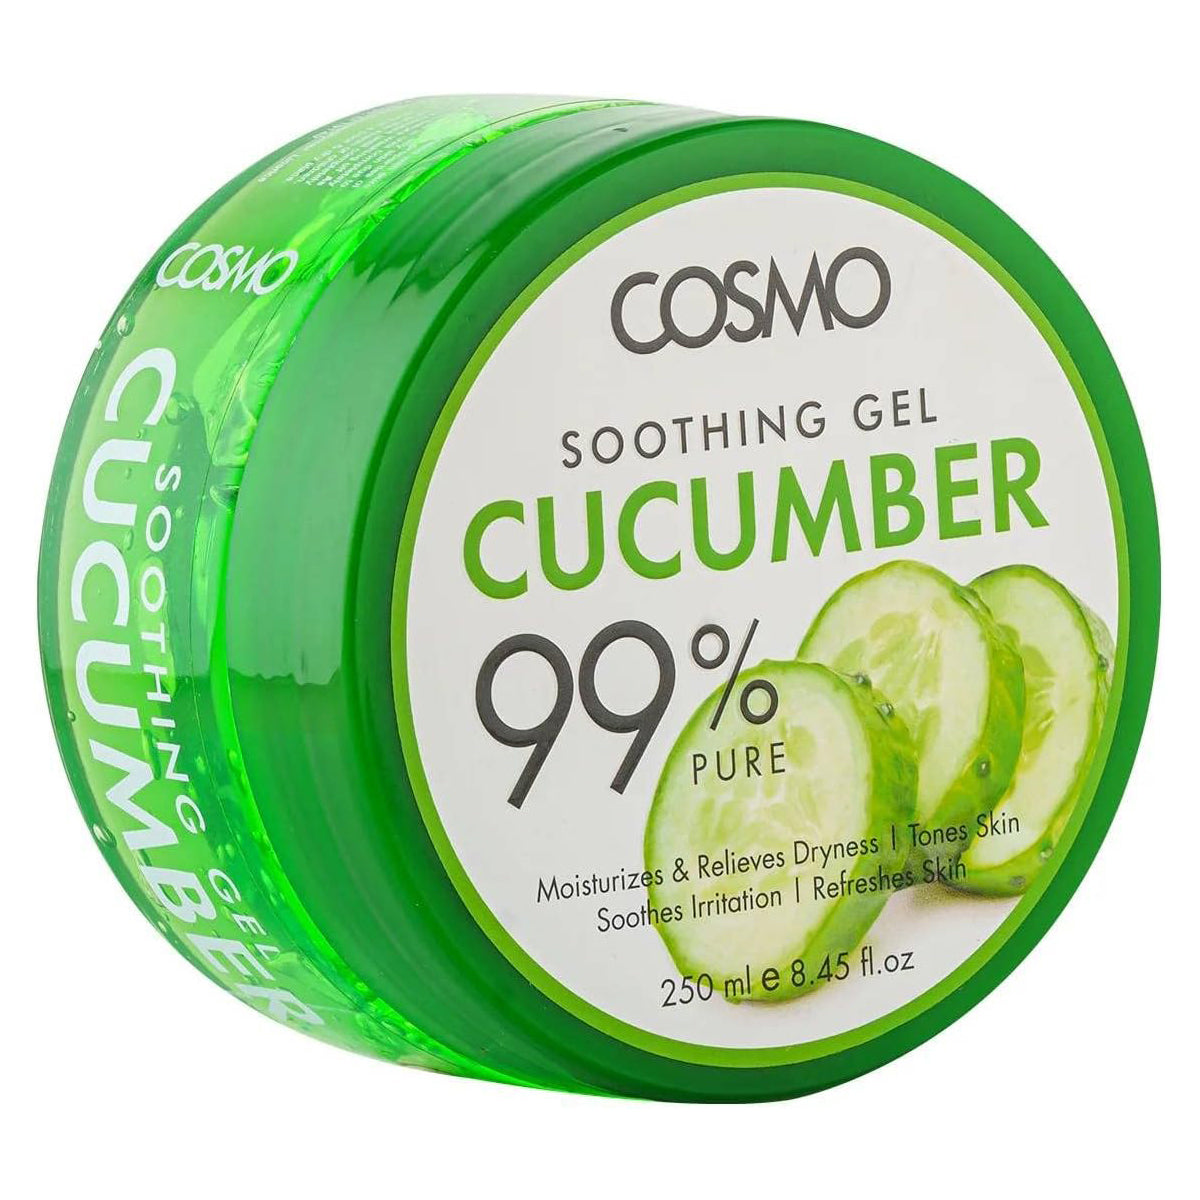 Cosmo Moisturizing Cucumber 100% Pure Soothing Gel 250ml, Tones Skin & Tightens Pores, Soothes & Refreshes, For Men & Women